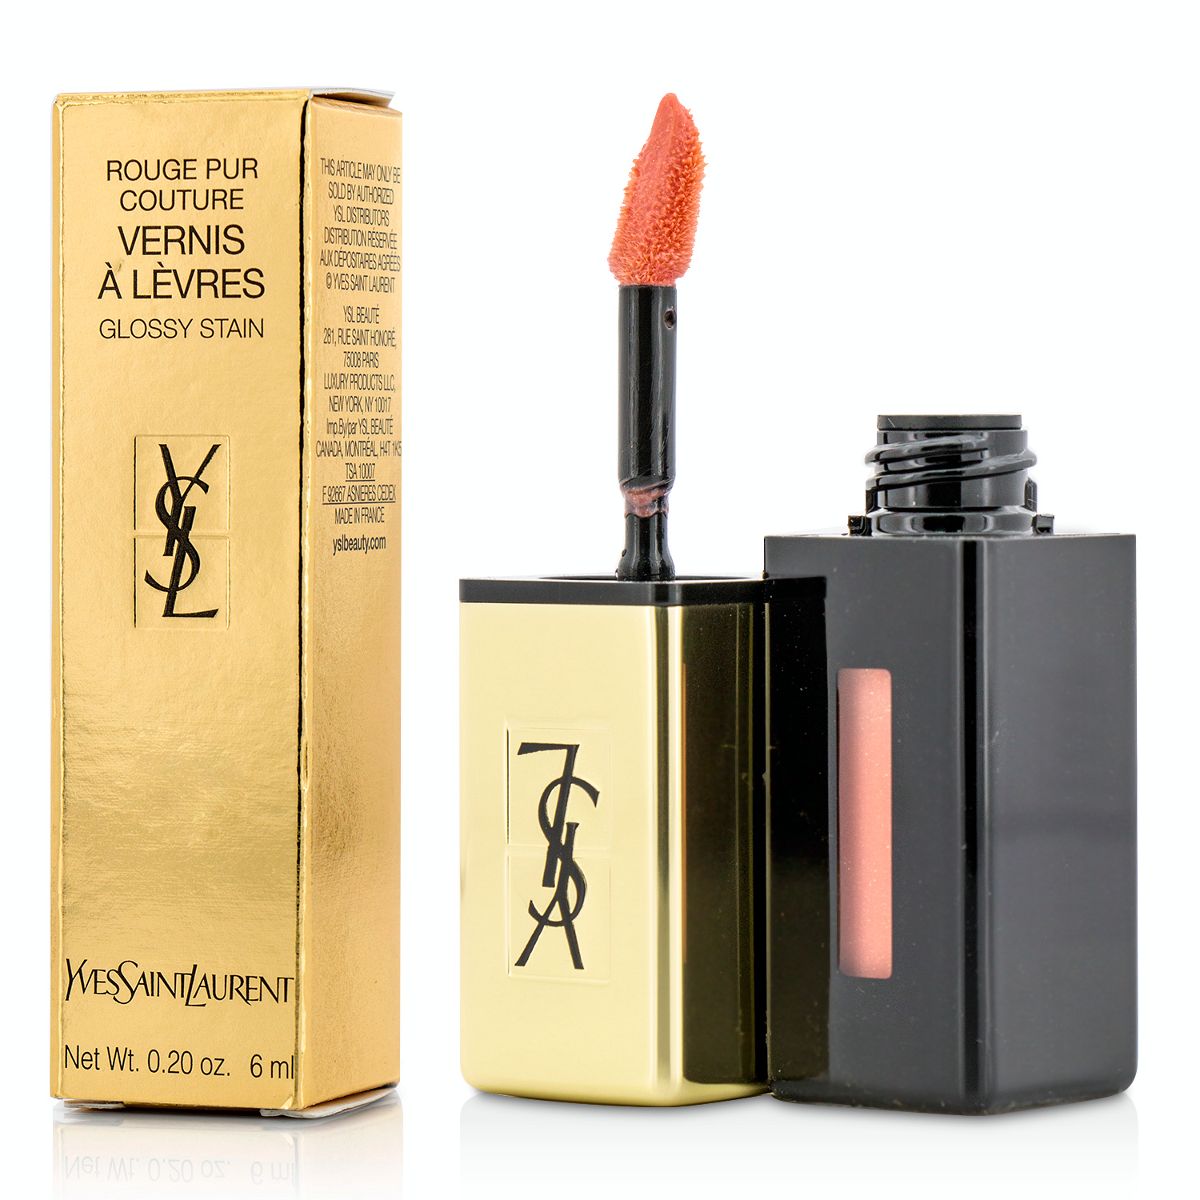 Rouge Pur Couture Vernis a Levres Glossy Stain - # 43 Rose Folk Yves Saint Laurent Image